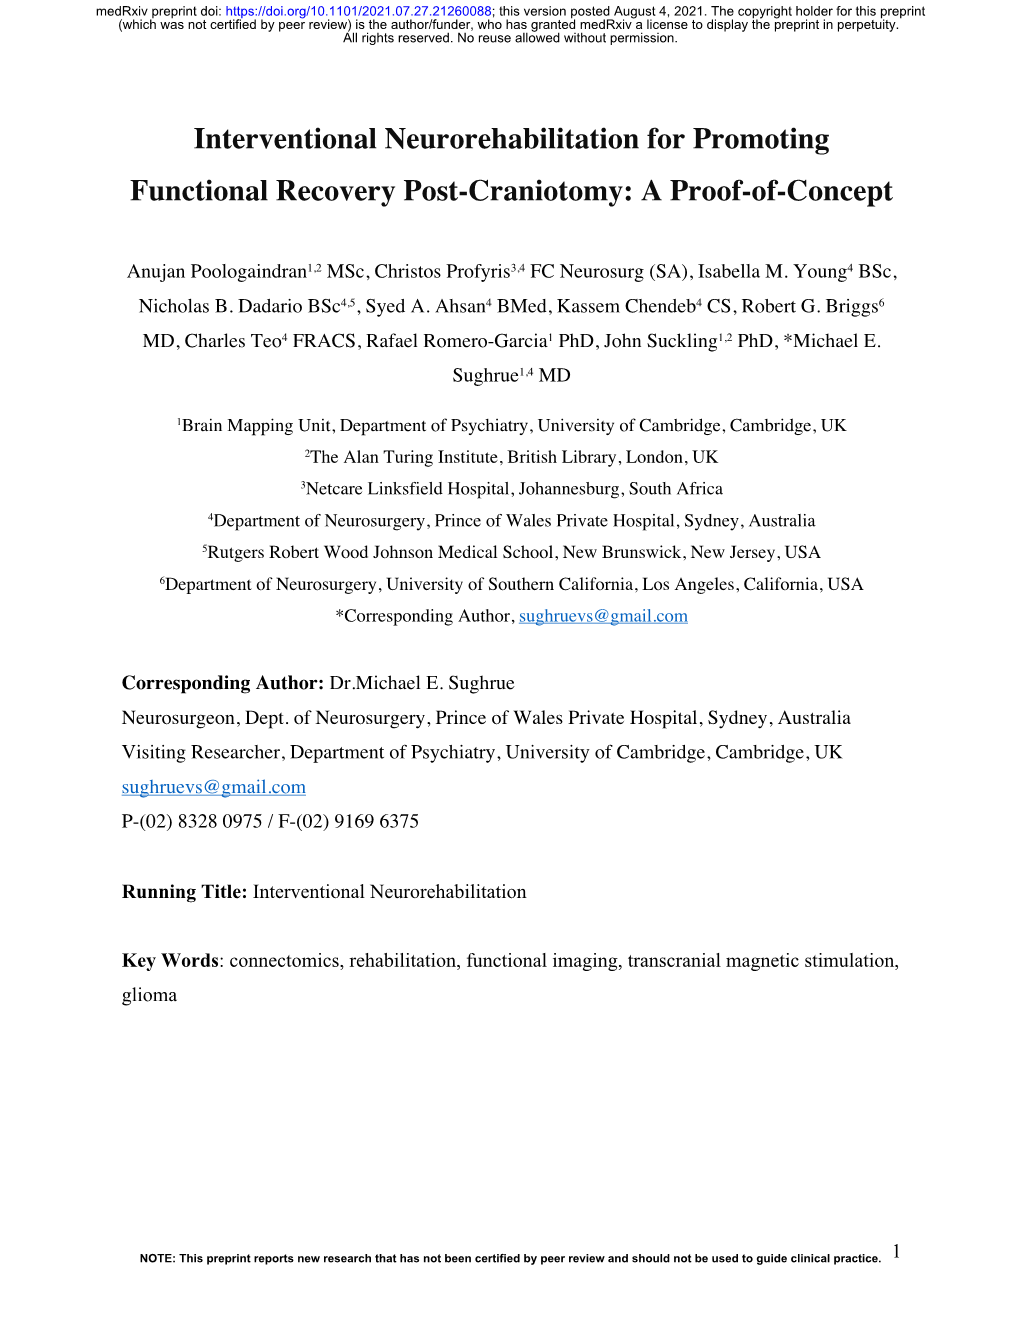 Interventional Neurorehabilitation for Promoting Functional Recovery Post-Craniotomy: a Proof-Of-Concept